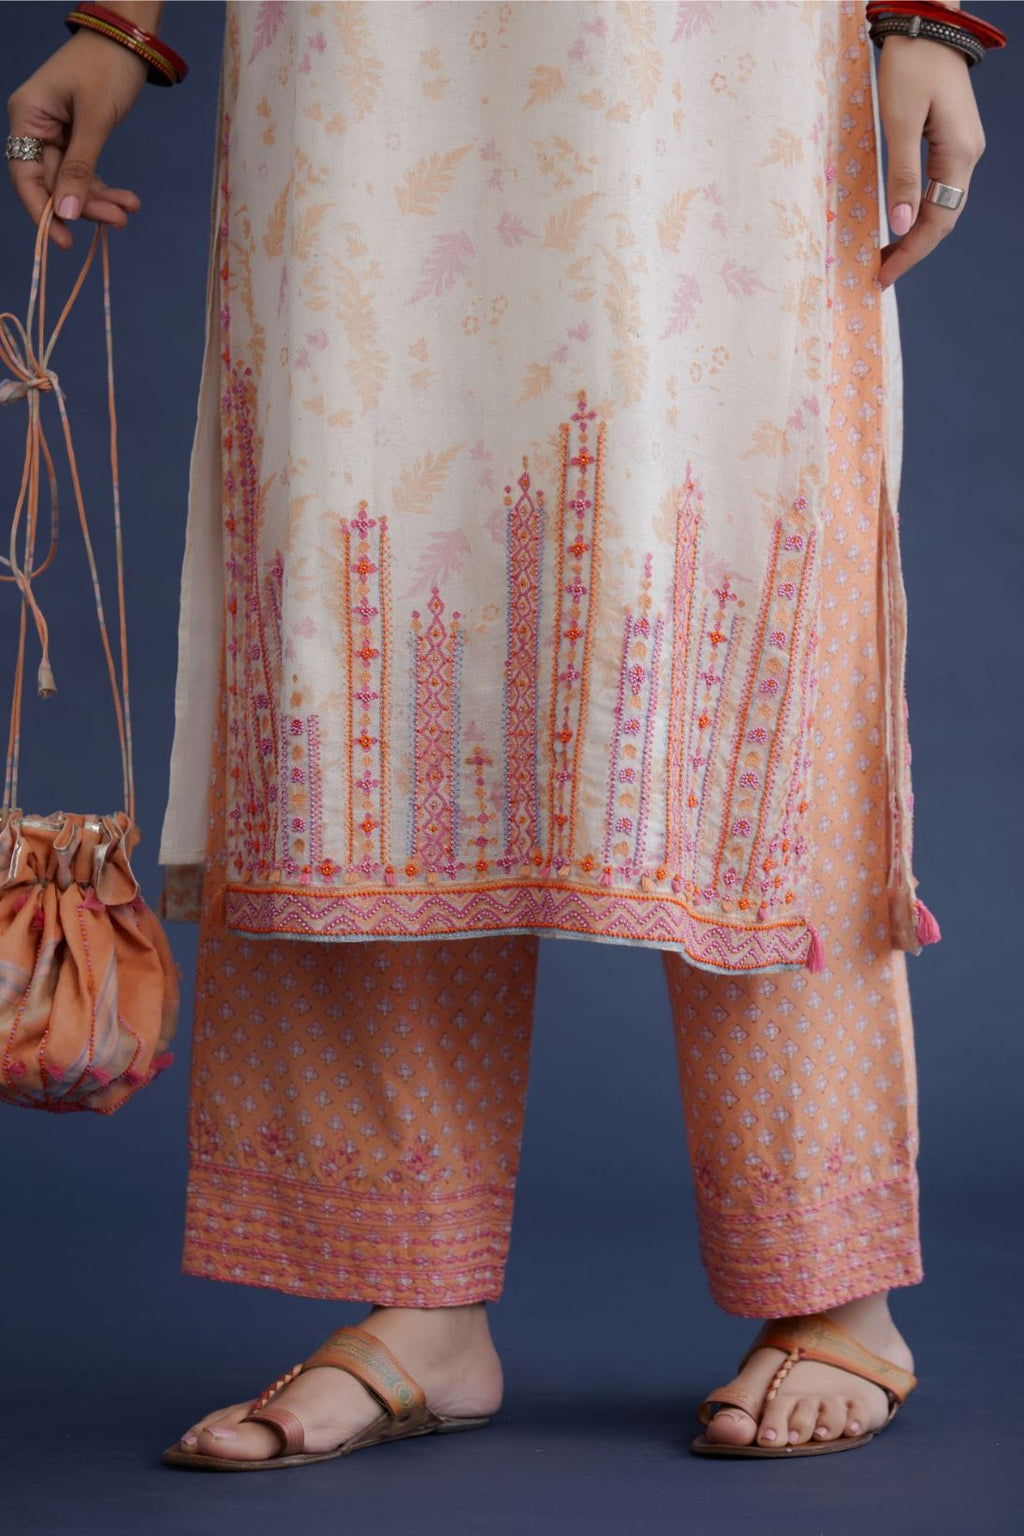 Off white hand block printed straight kurta set with pink and orange thread embroidery and delicate beaded hand work at neck, sleeve and hem